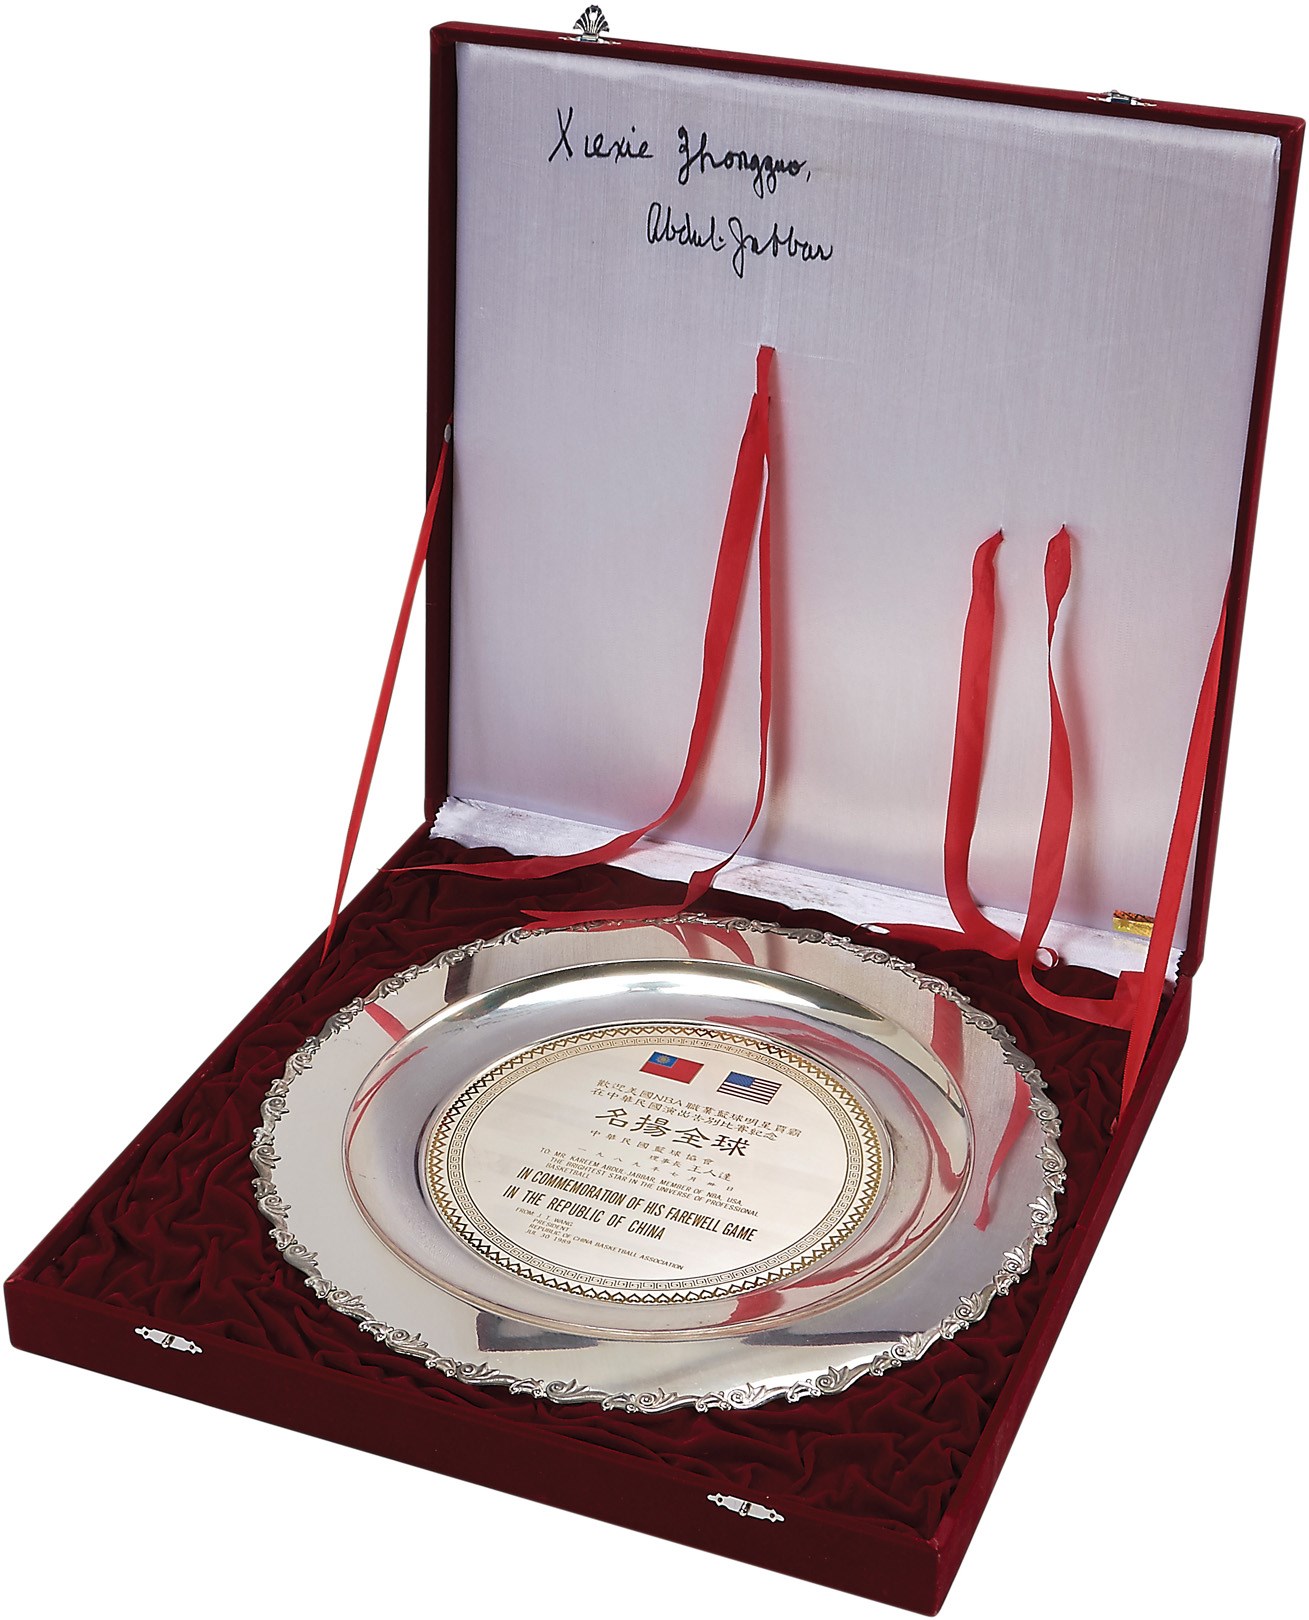 - 1989 Kareem Abdul-Jabbar Silver Charger Presented By The People's Republic of China (Jabbar COA - Signed In Chinese)